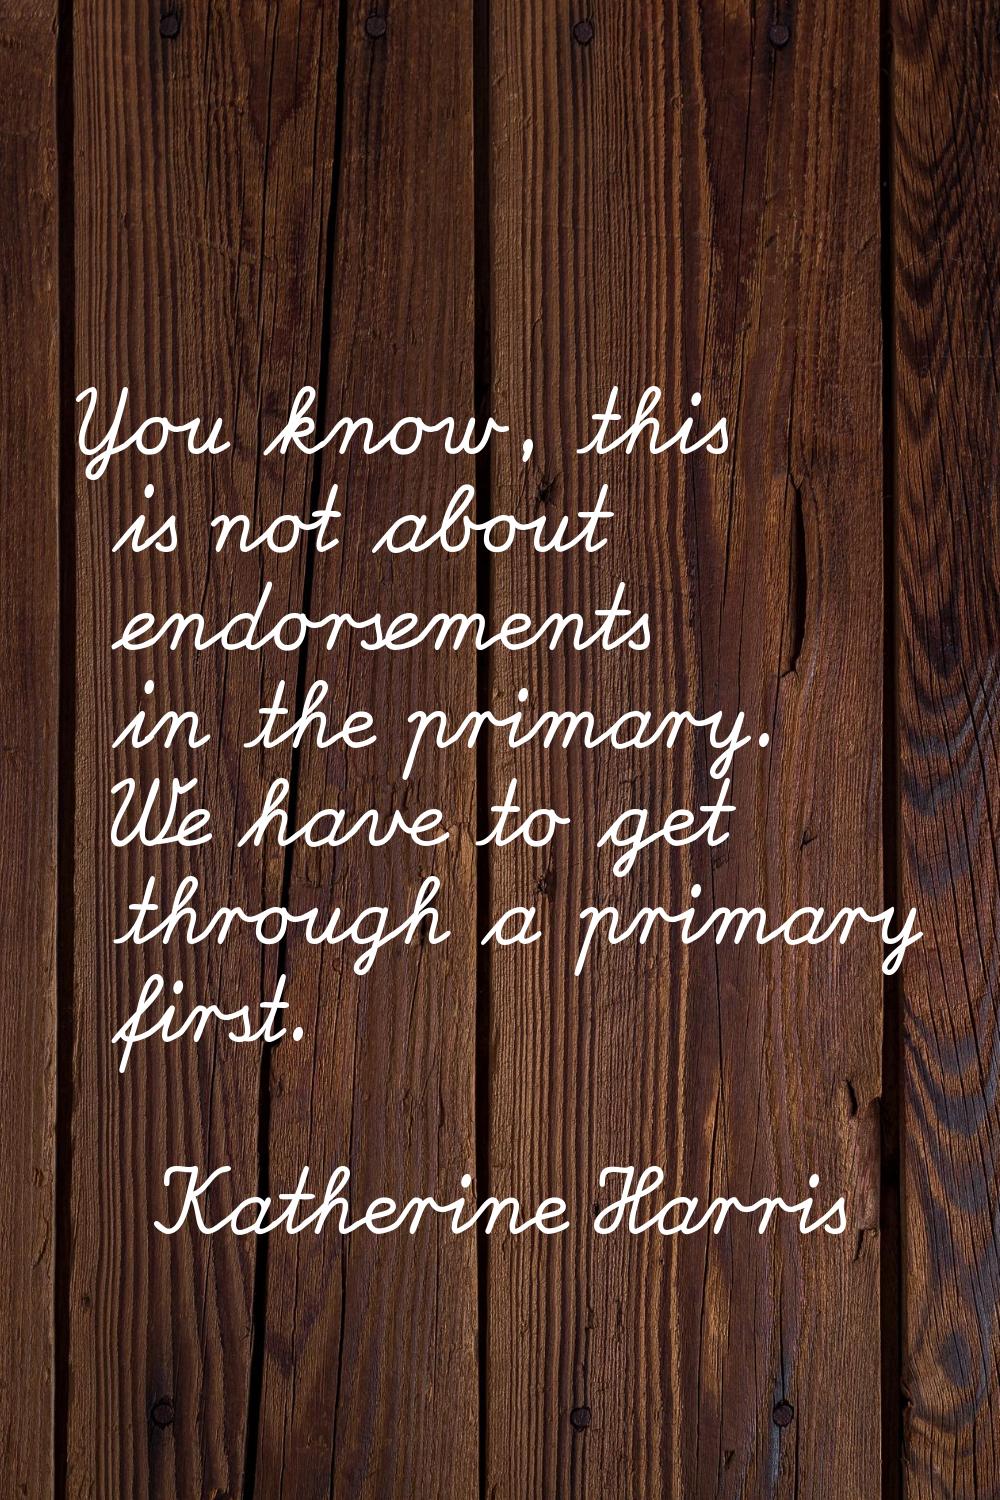 You know, this is not about endorsements in the primary. We have to get through a primary first.